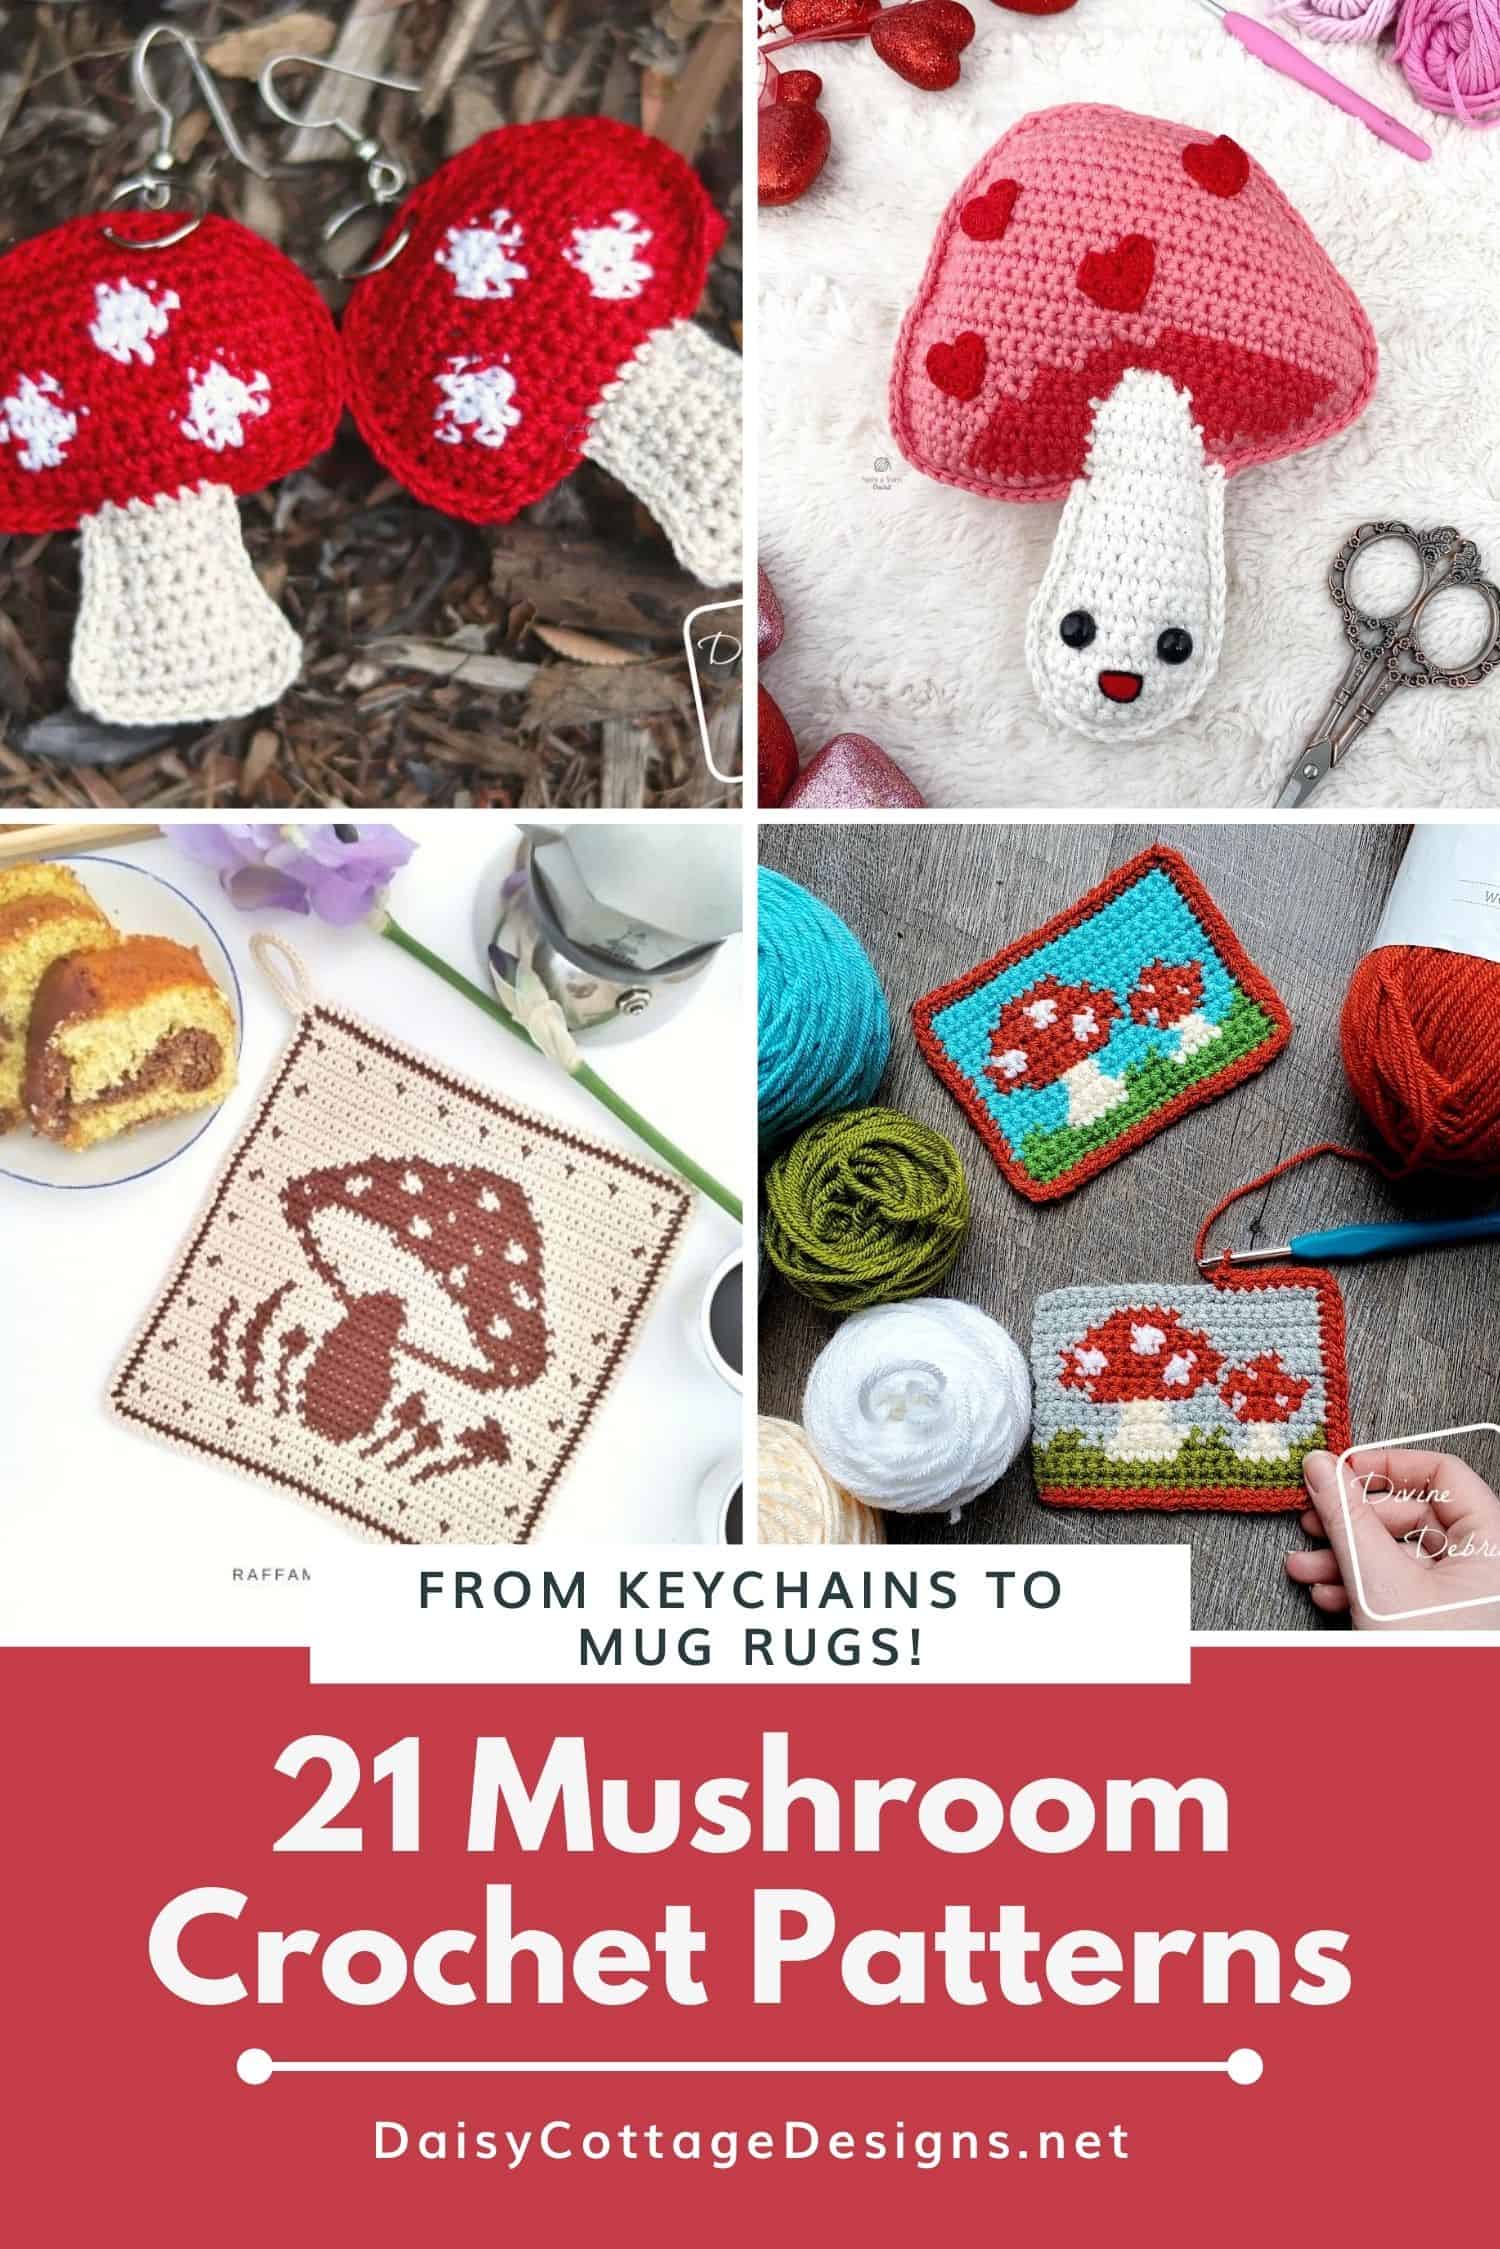 These free crochet mushroom patterns are absolutely adorable. A few basic stitches are all you need to make these mushrooms for yourself or for your mushroom-loving friends!